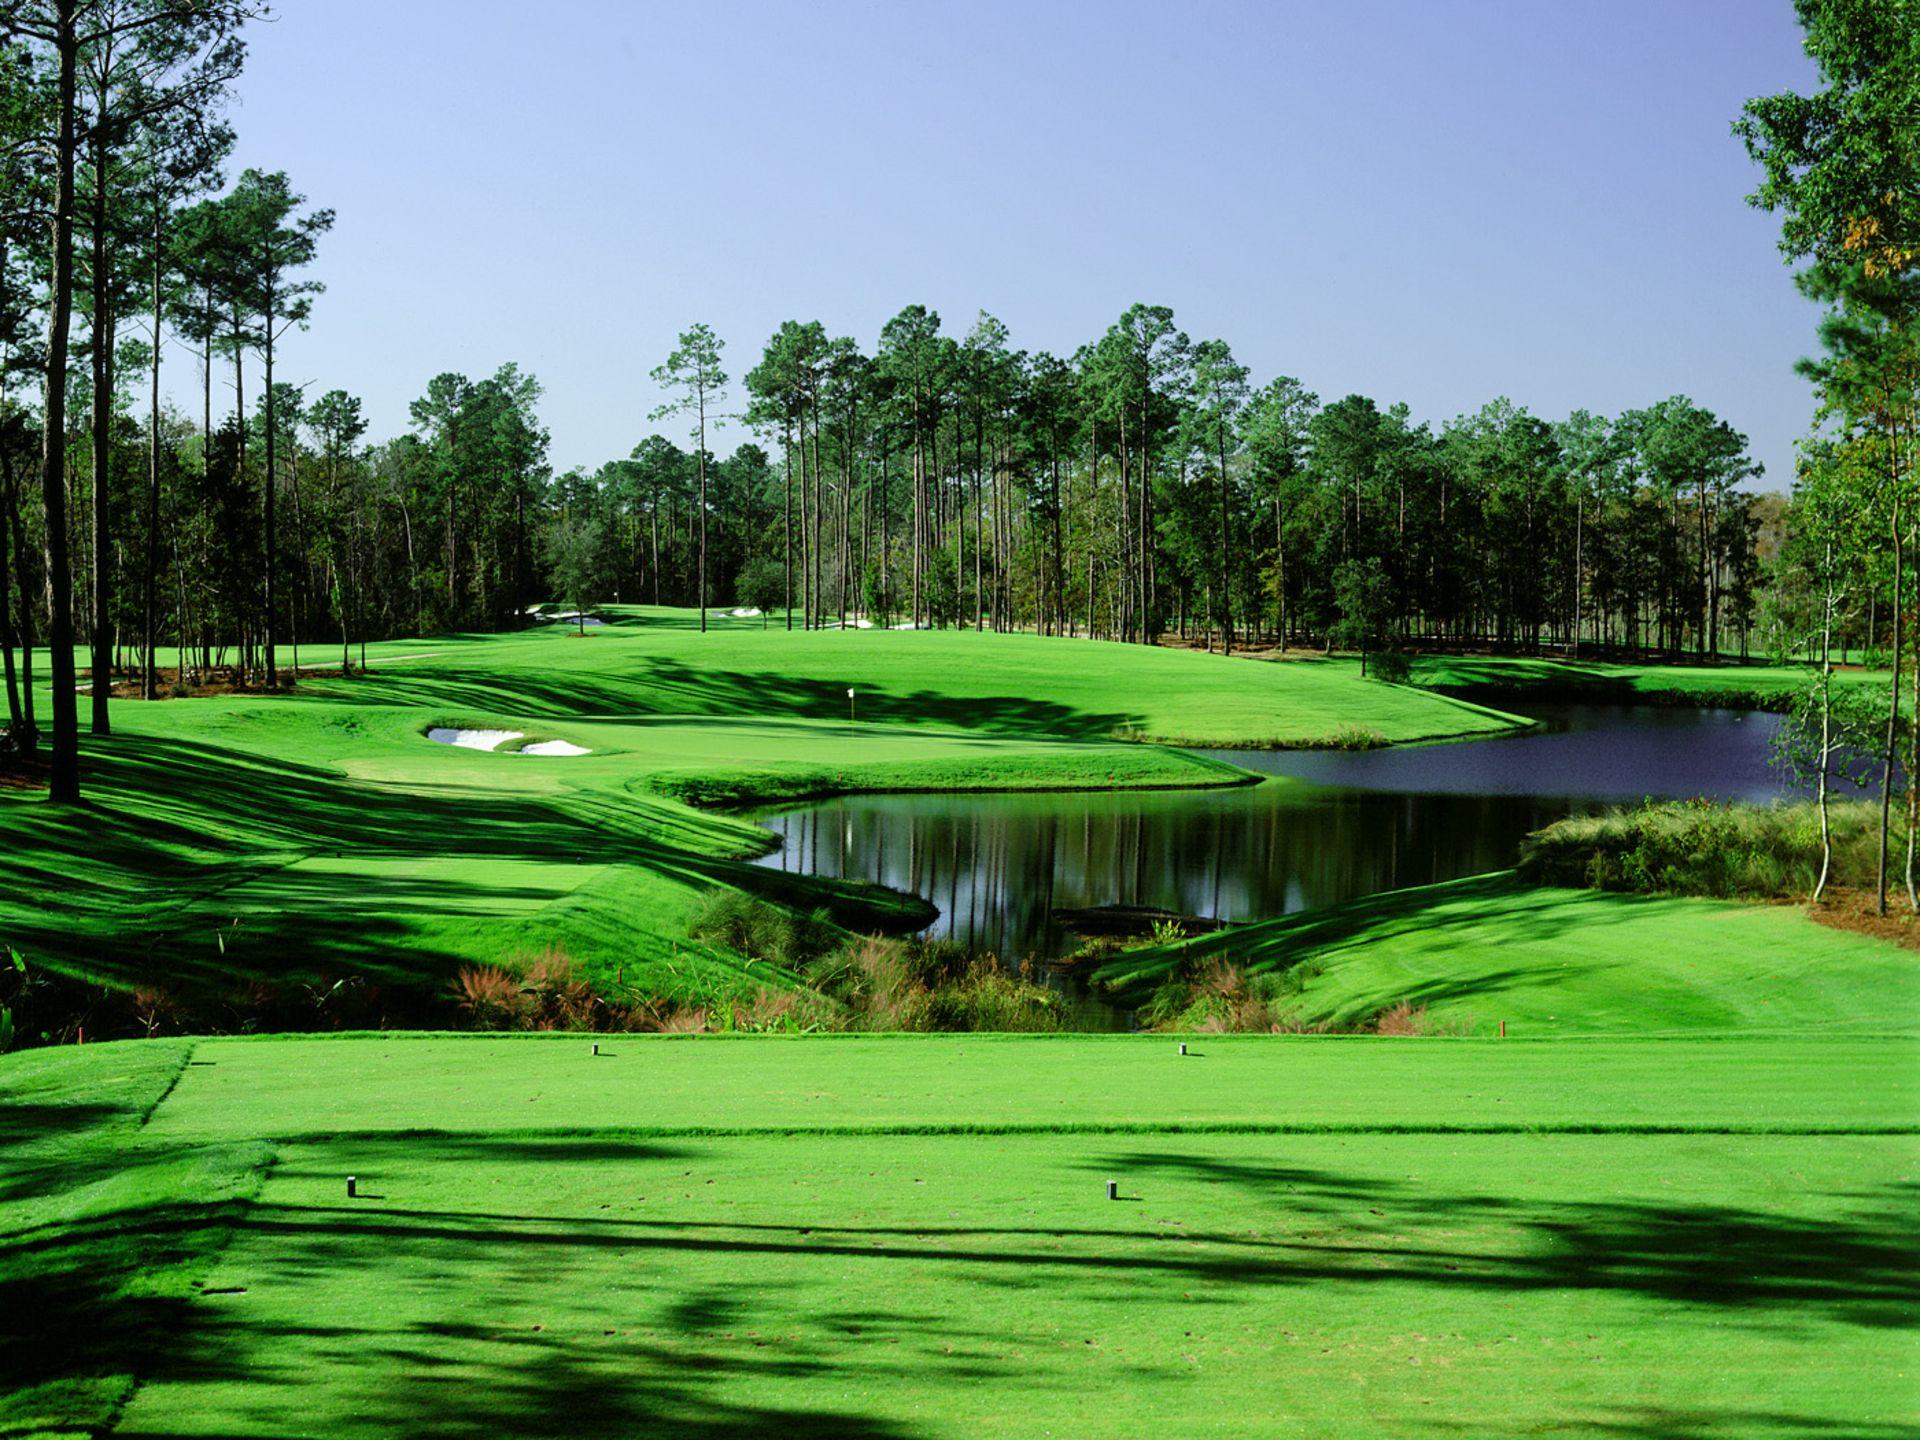 Free Golf Best HD Widescreen Image. Beautiful image HD Picture